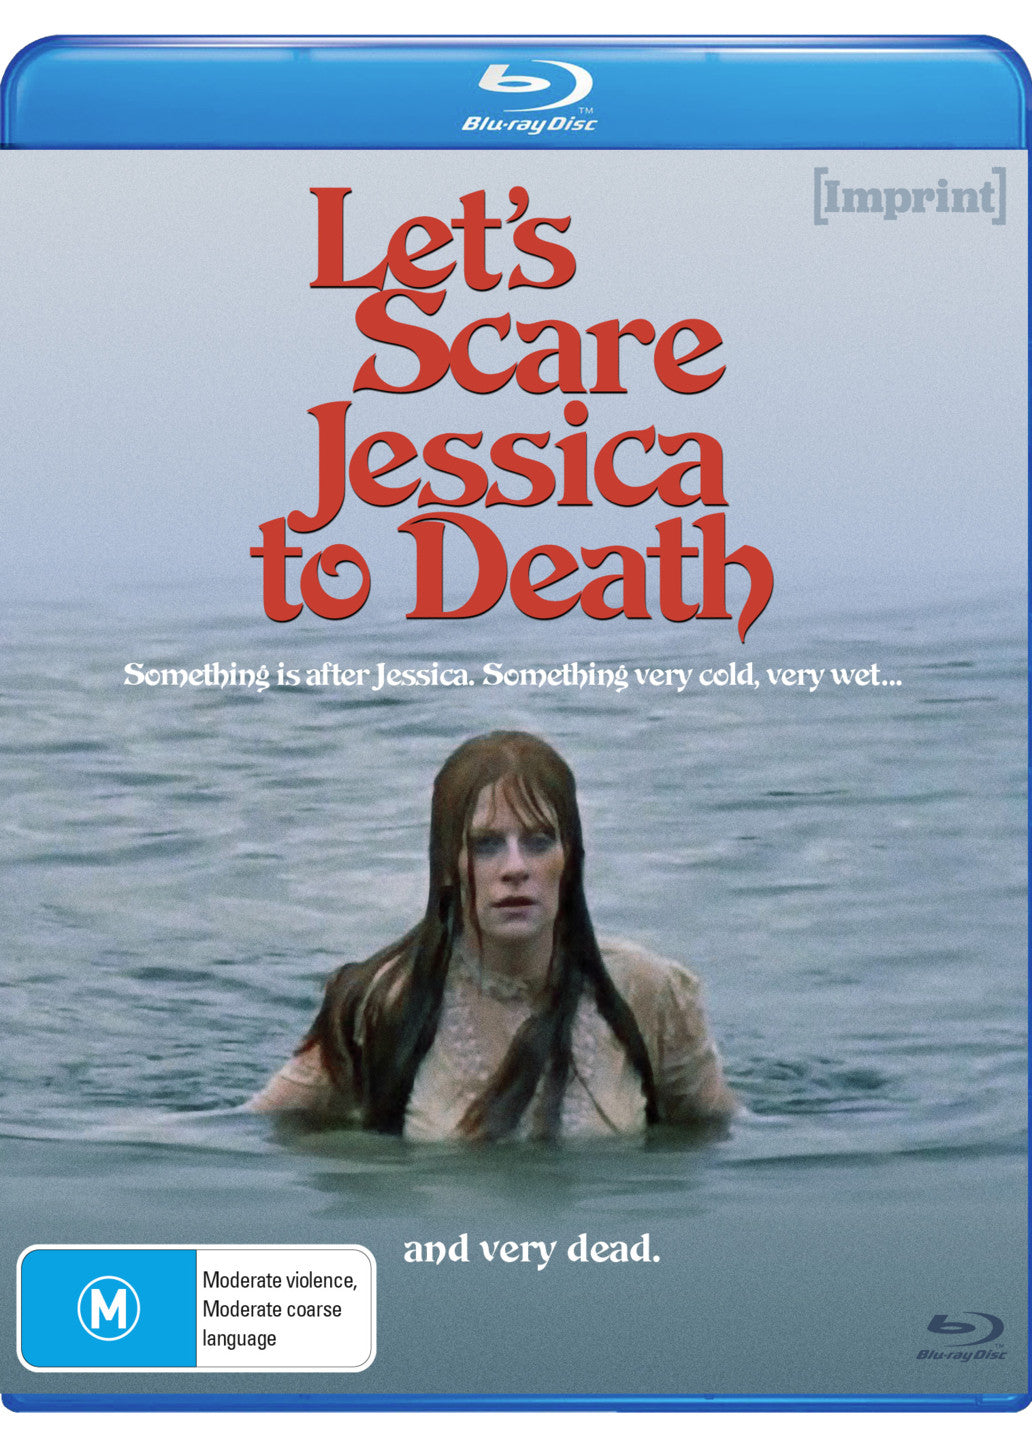 LET'S SCARE JESSICA TO DEATH (IMPRINT STANDARD EDITION) - BLU-RAY